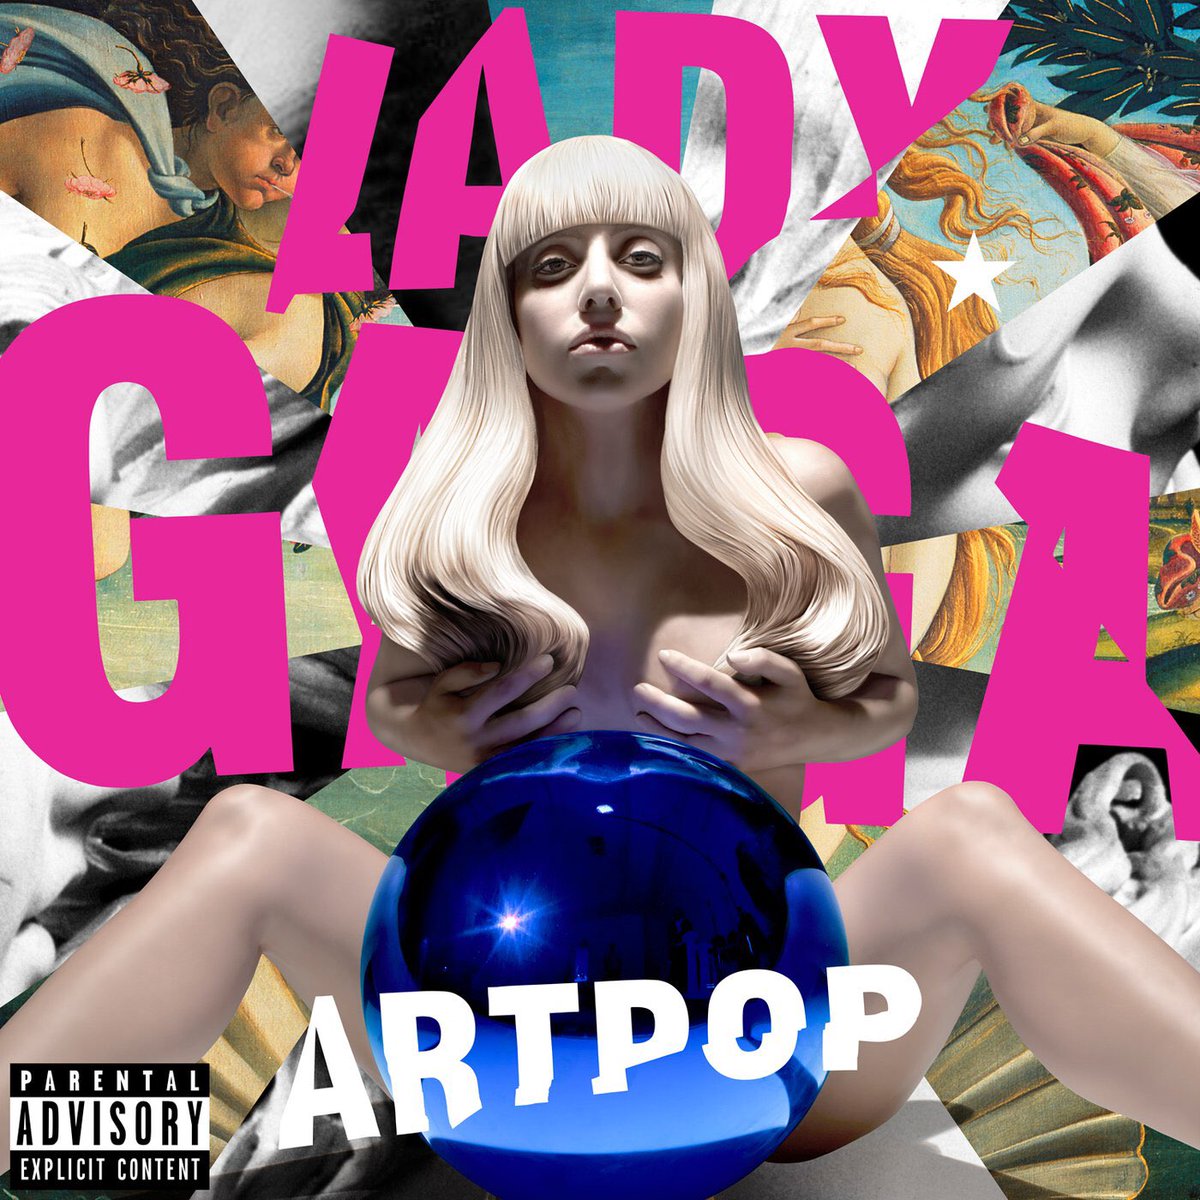 some of us have been influenced by this album since day 1. hell, my sobriety date aligns with the Houston artRAVE concert. 